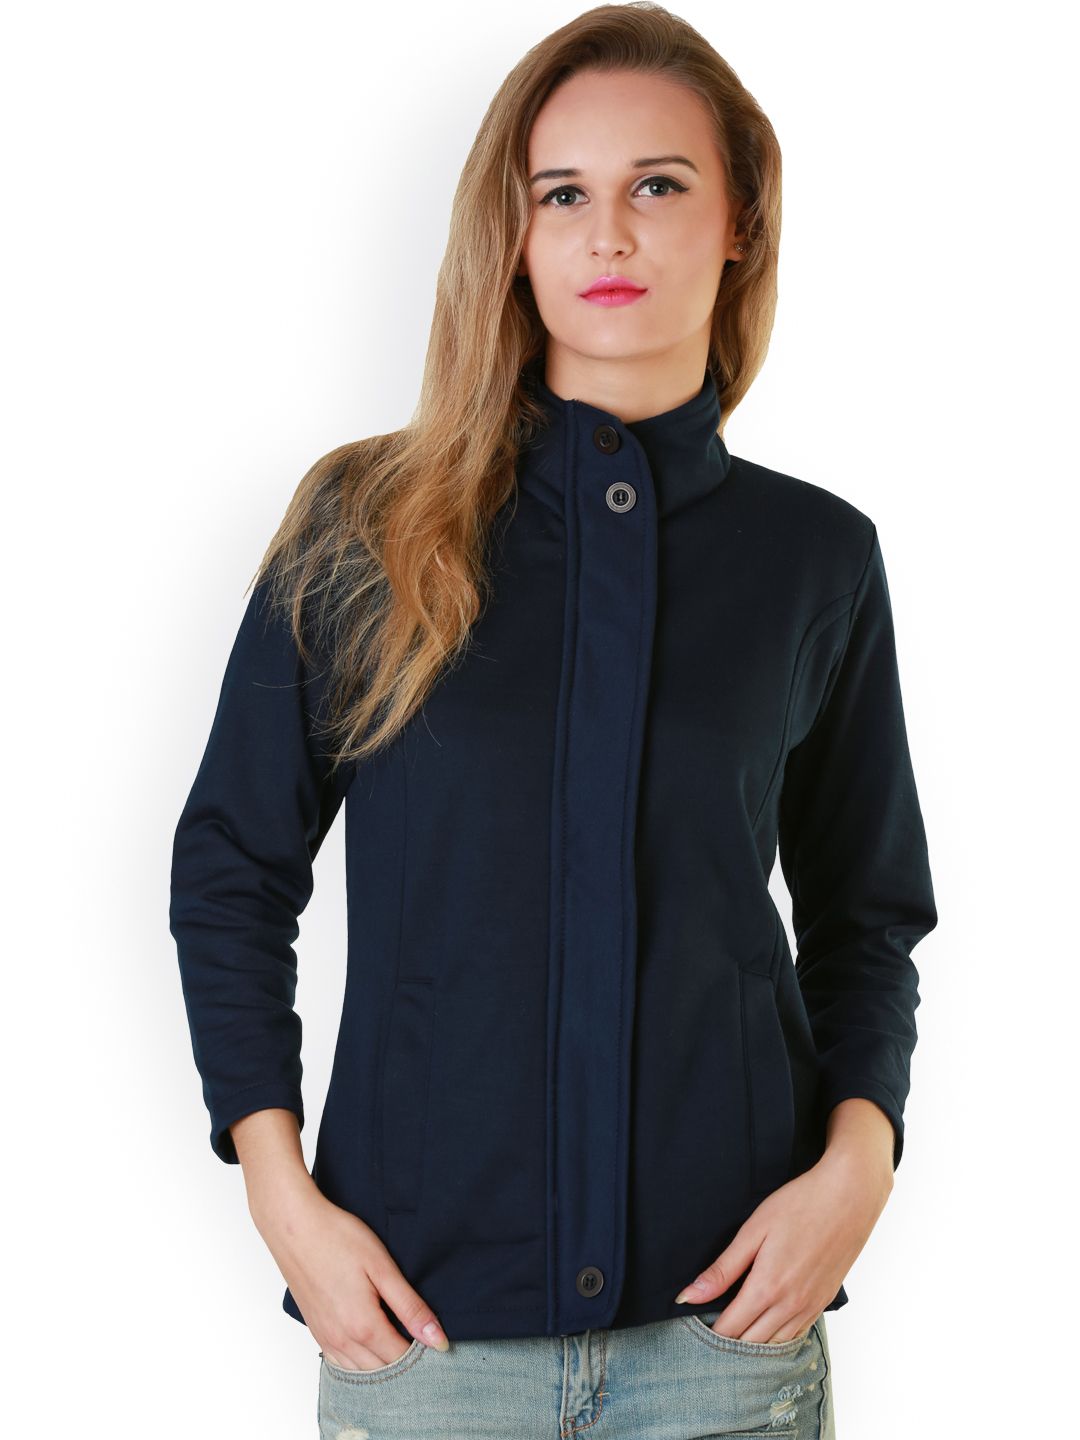 Belle Fille Blue Tailored Jacket Price in India